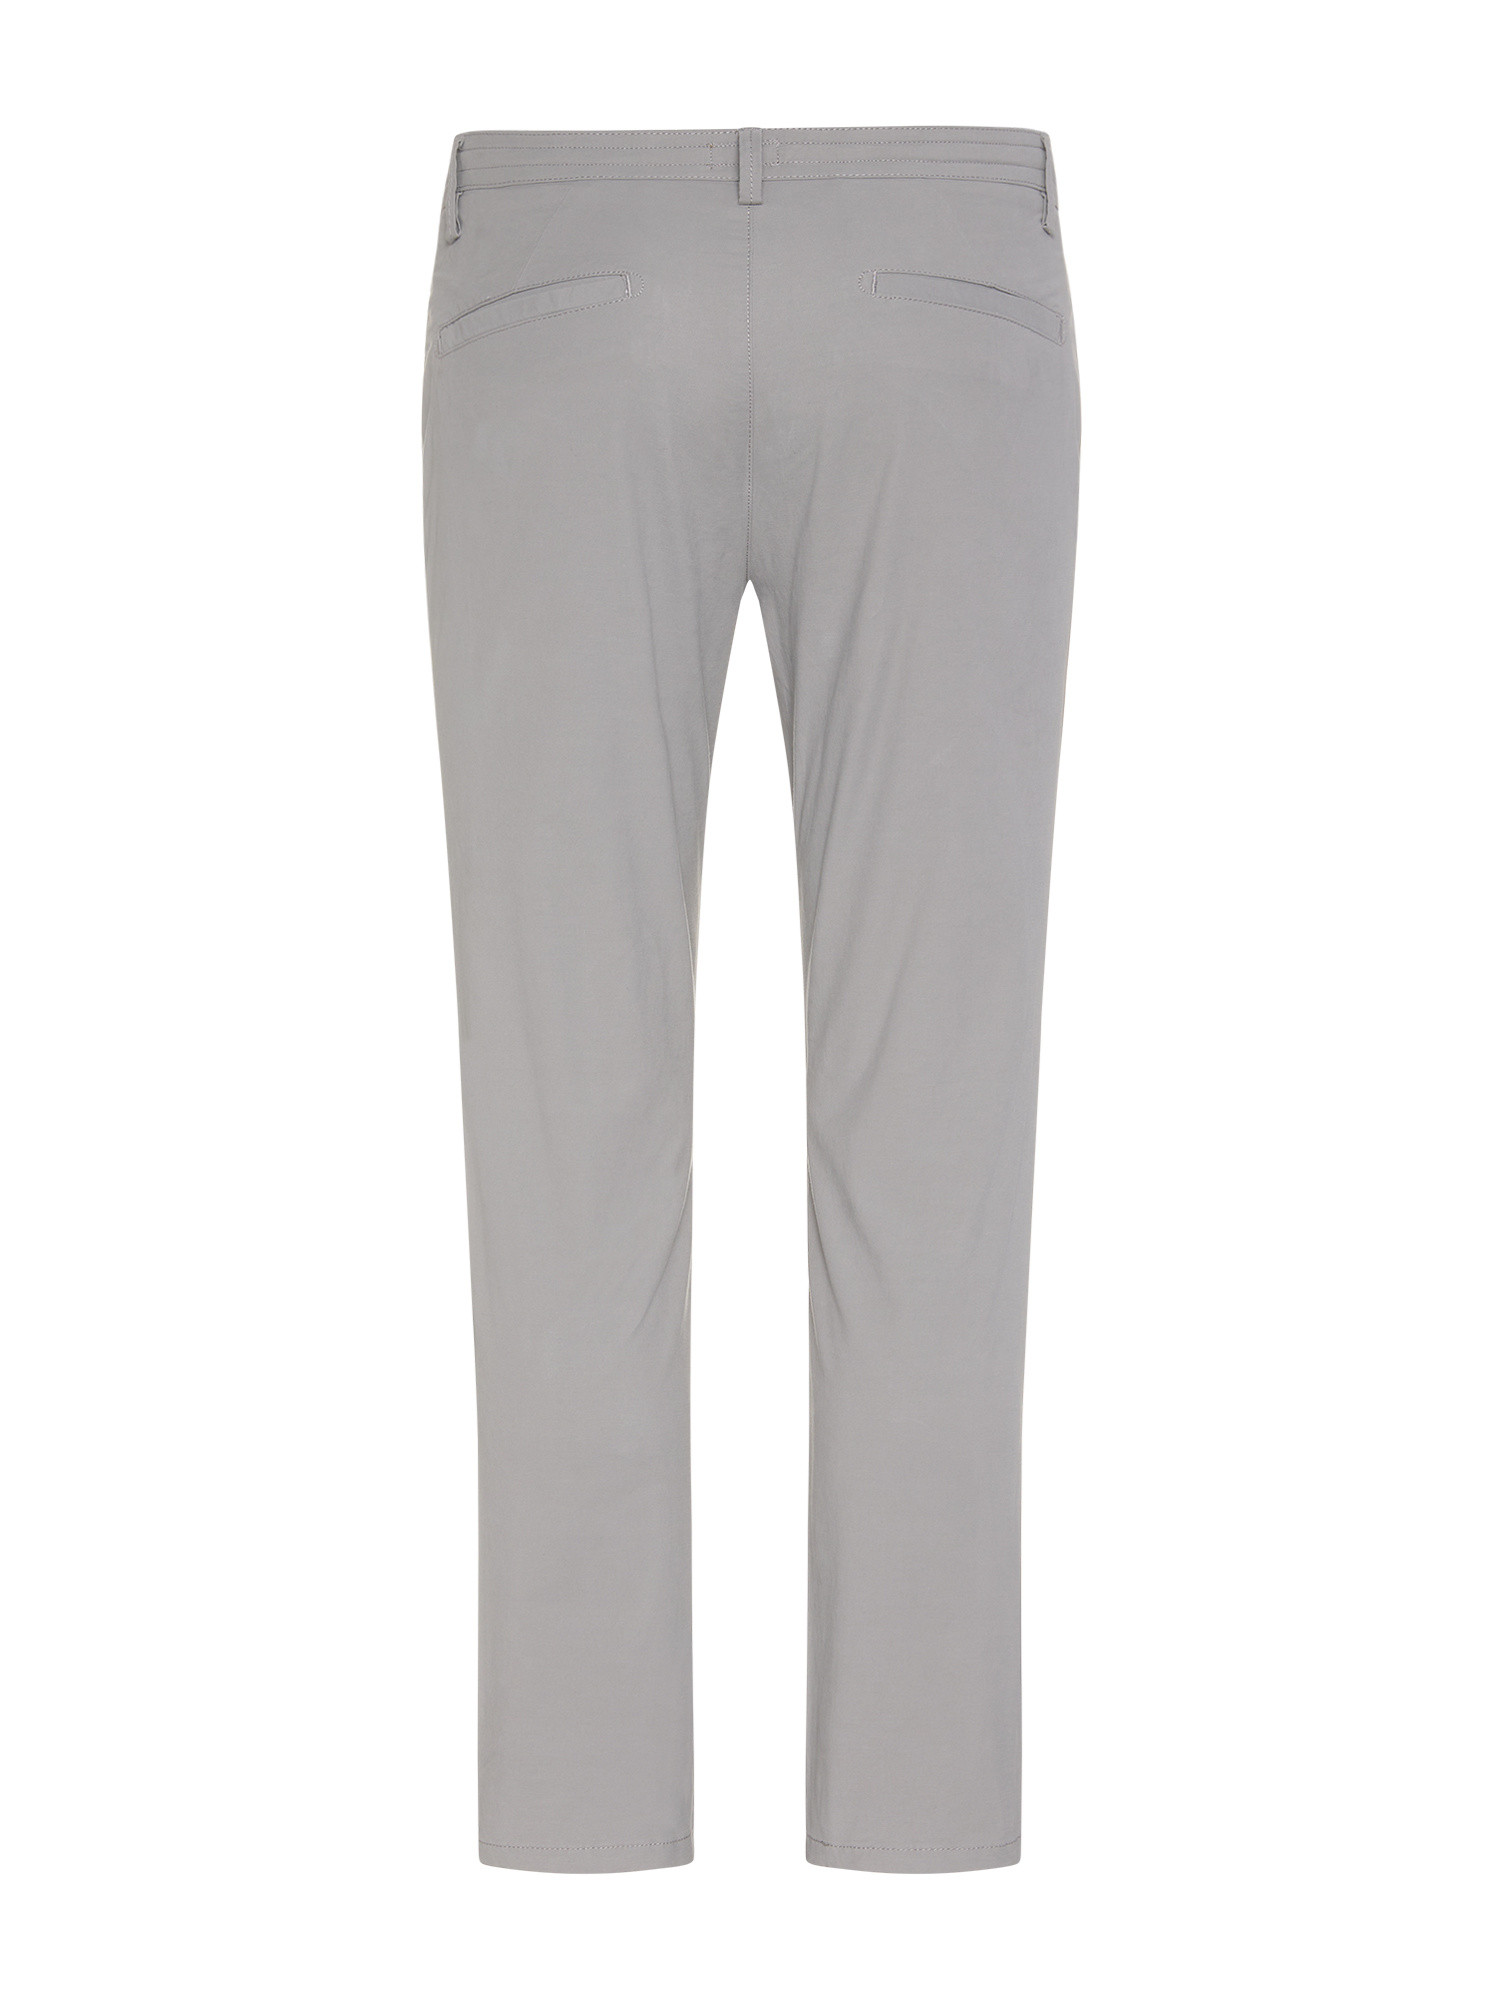 JCT - Jogger chino slim fit, Grigio, large image number 1